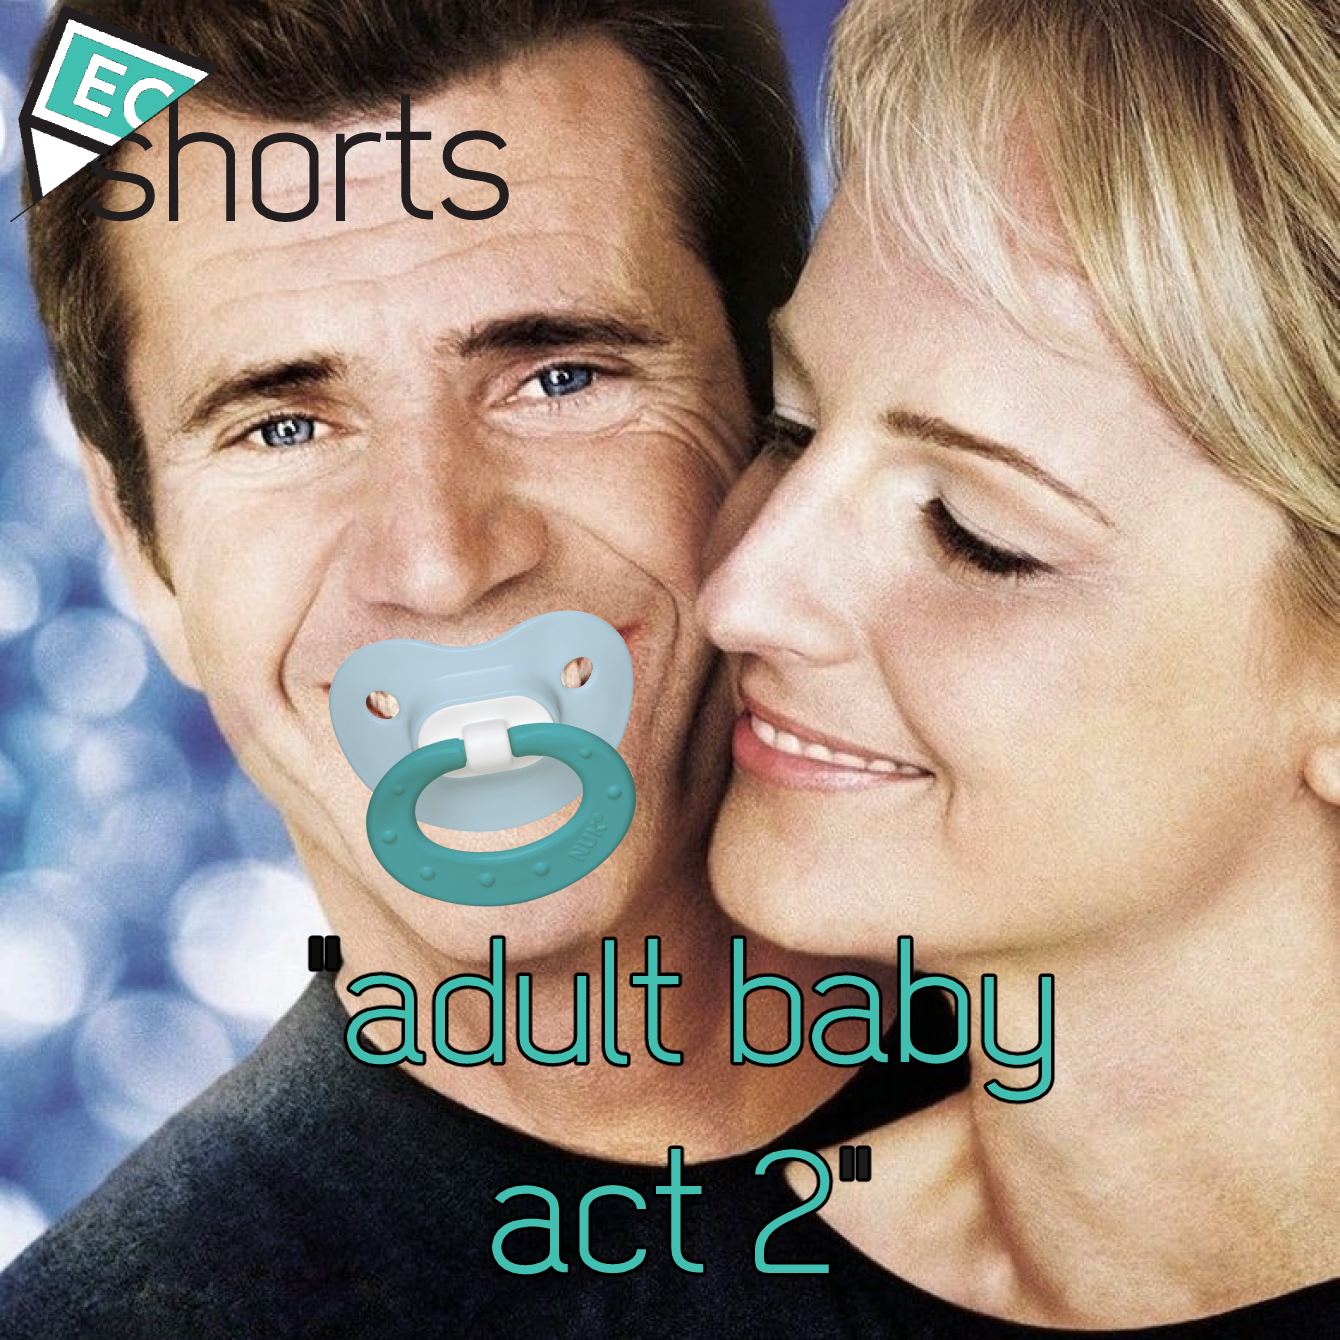 Short Special: “Adult Baby” – Act 2 – Extra Credit